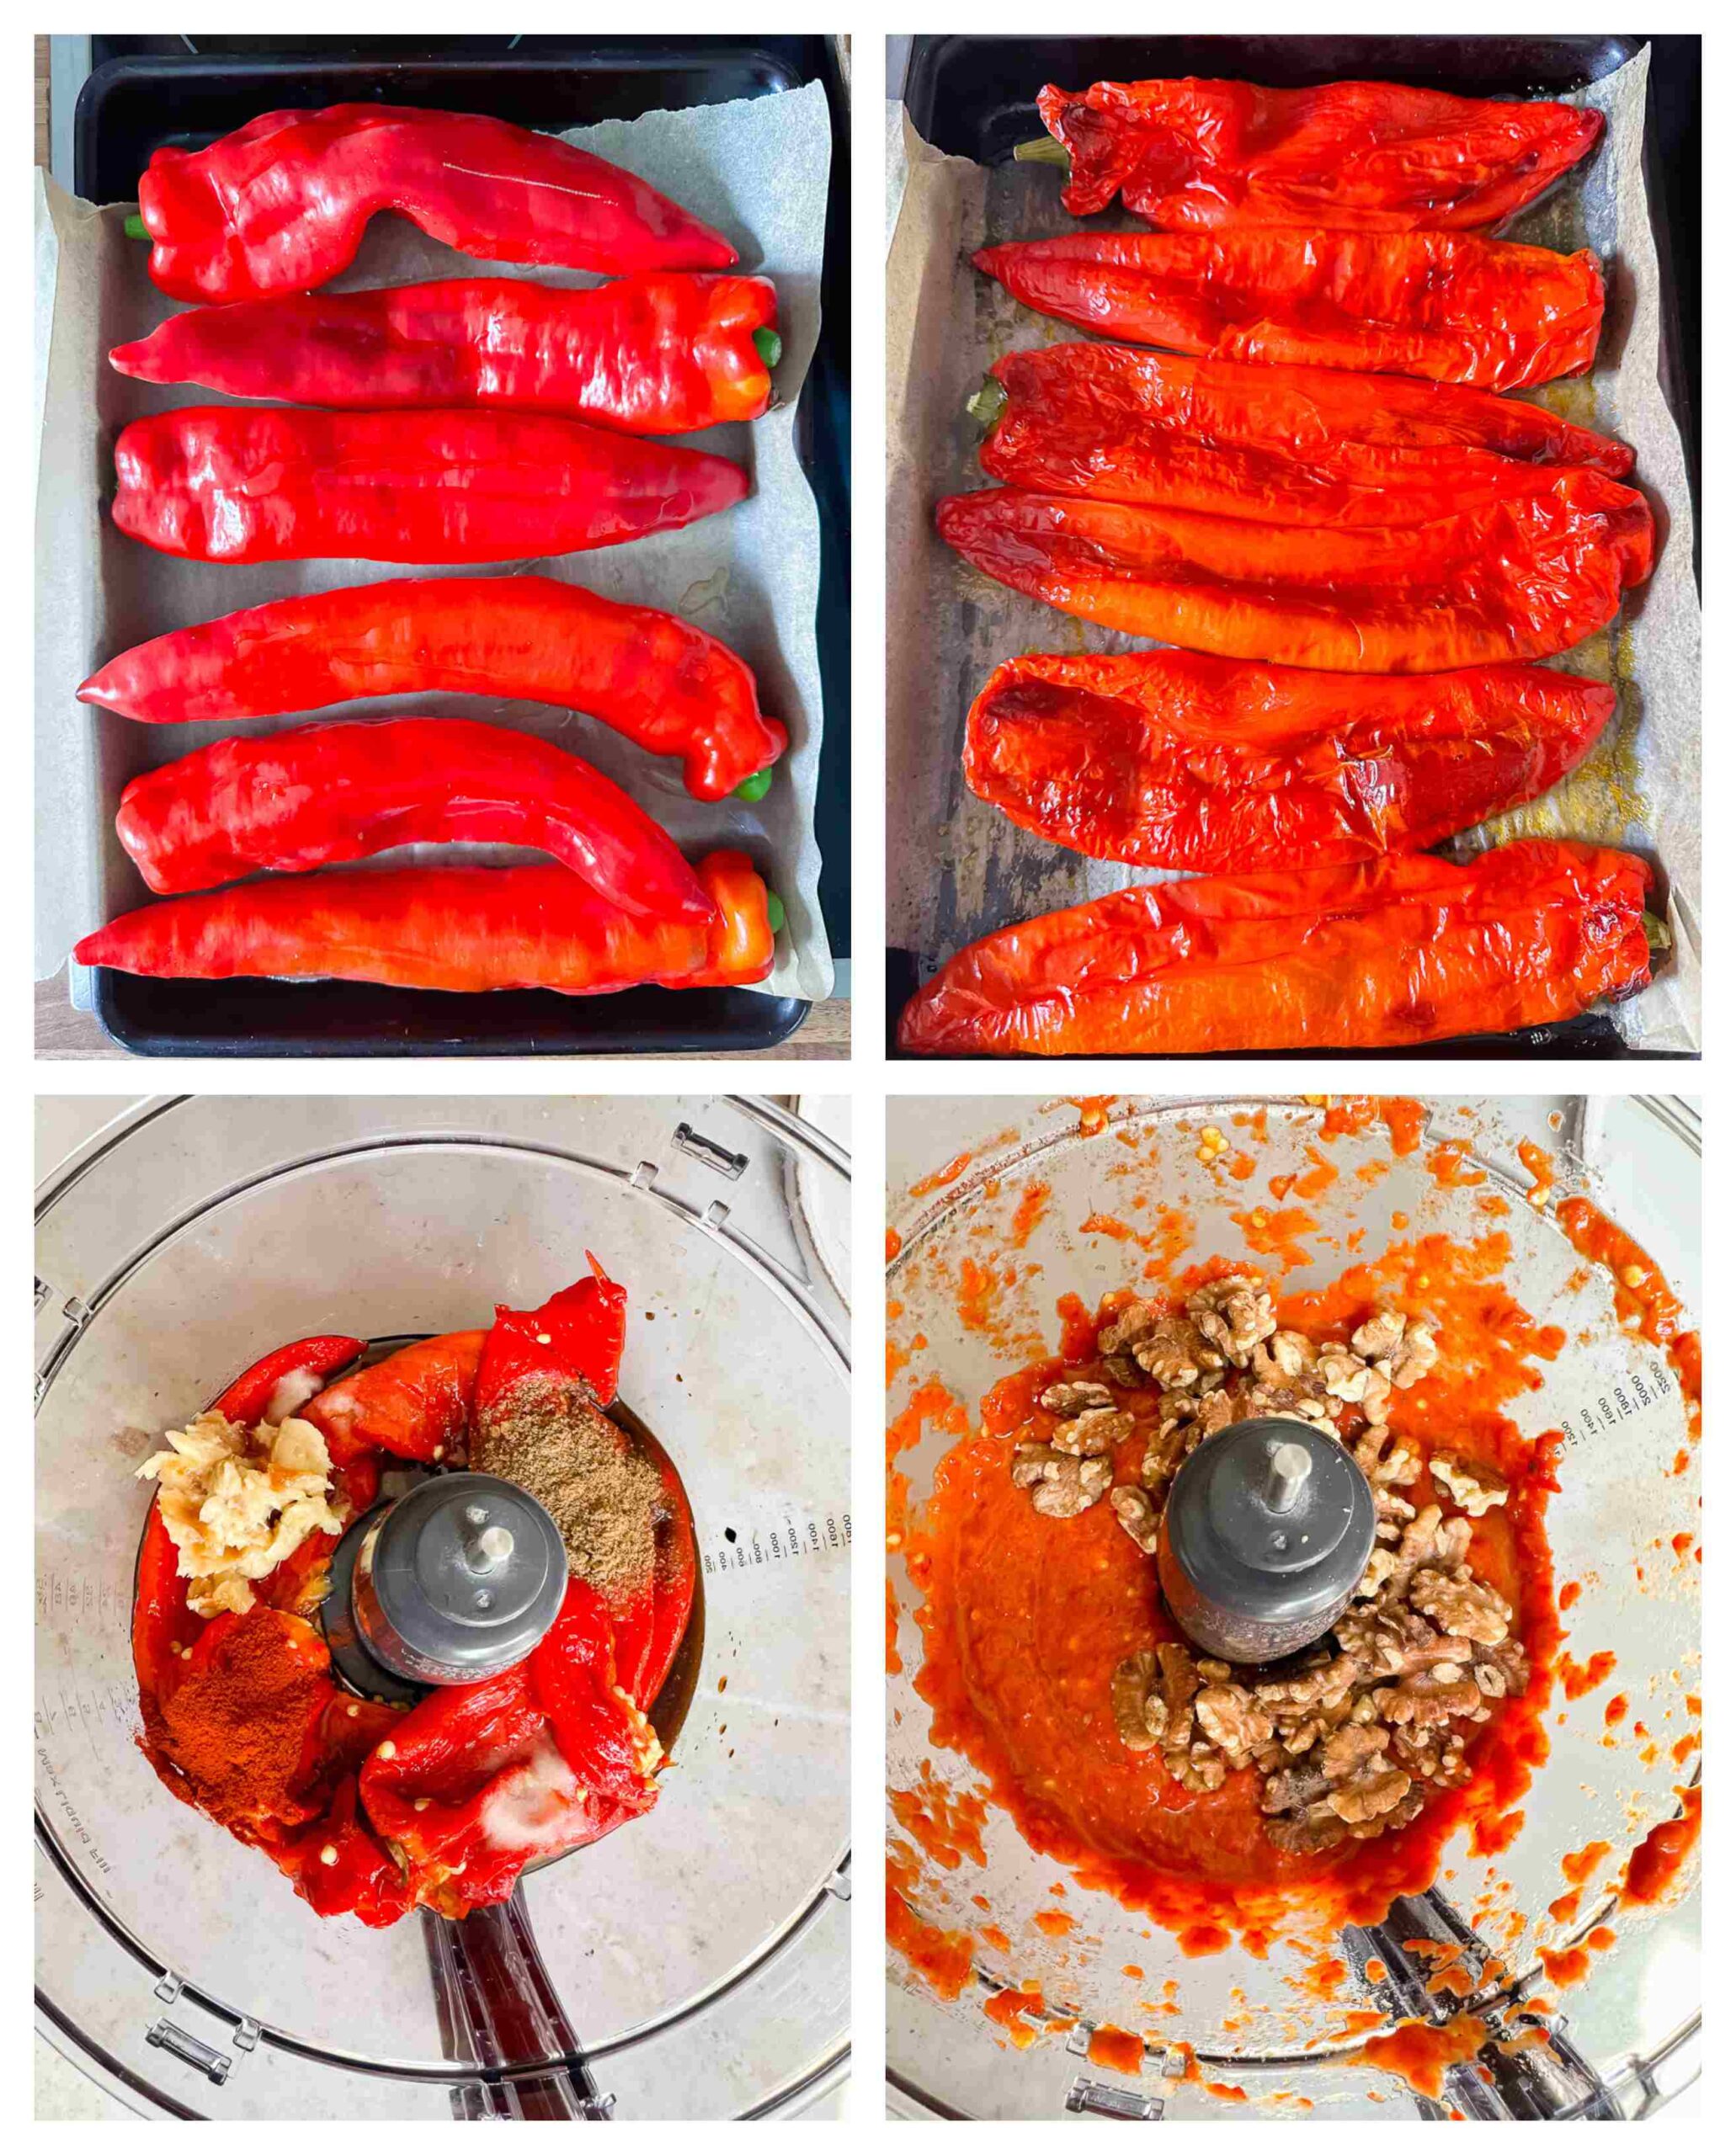 Process shot of red peppers being roasted and blended into the dip